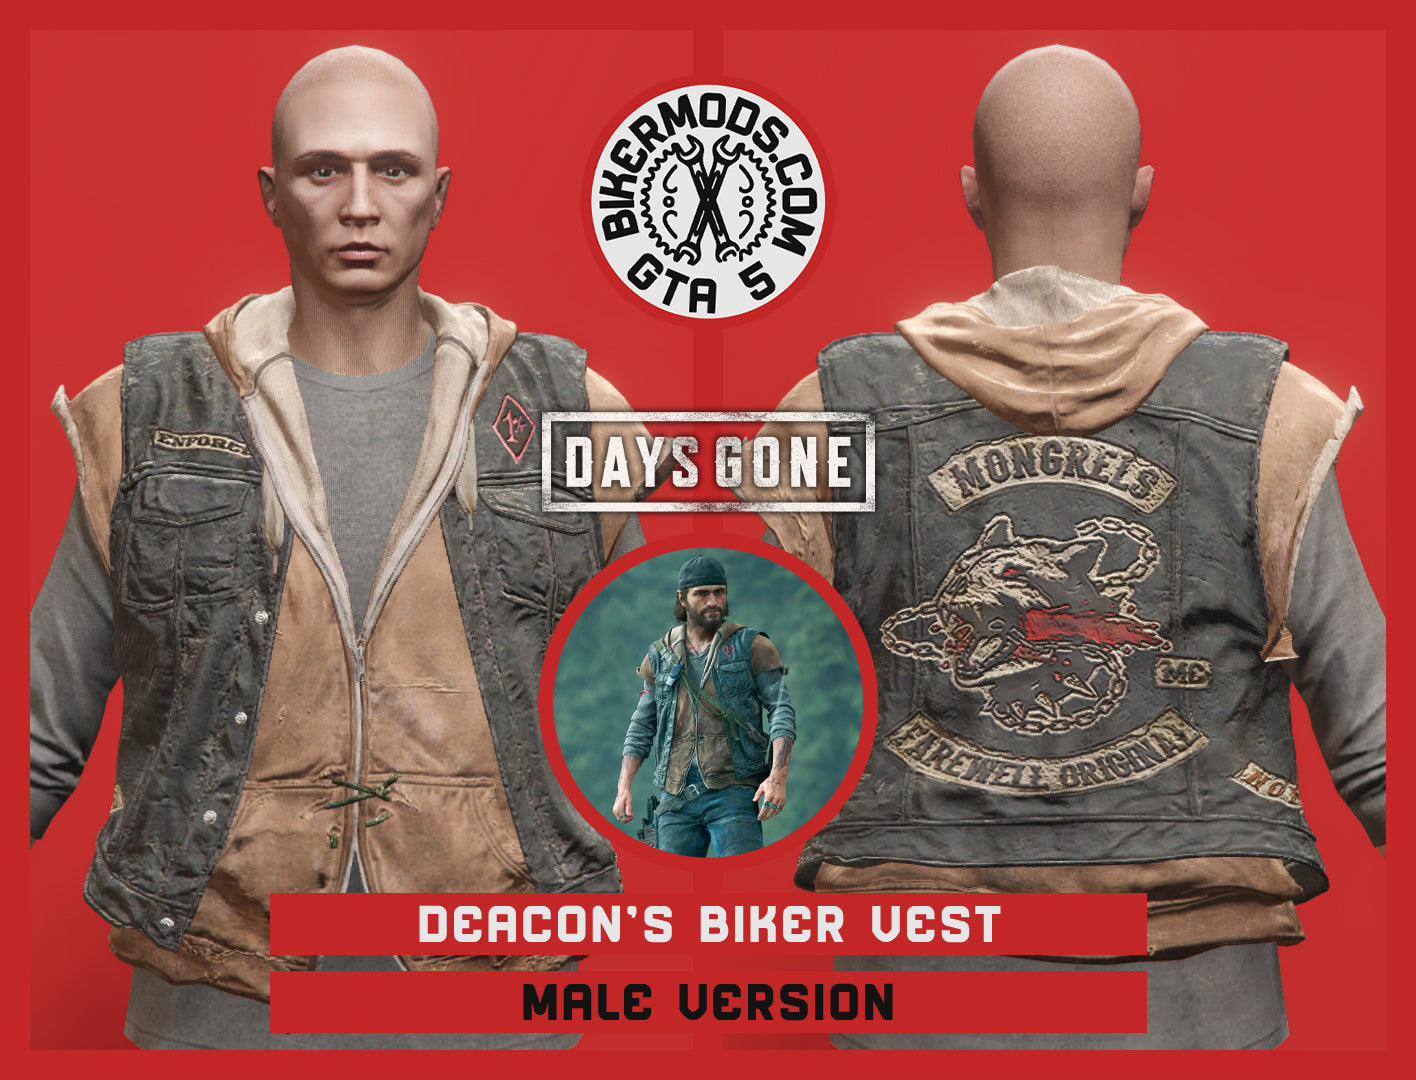 Deacon's Biker Vest (Days Gone) Shirt and Hoodie Included